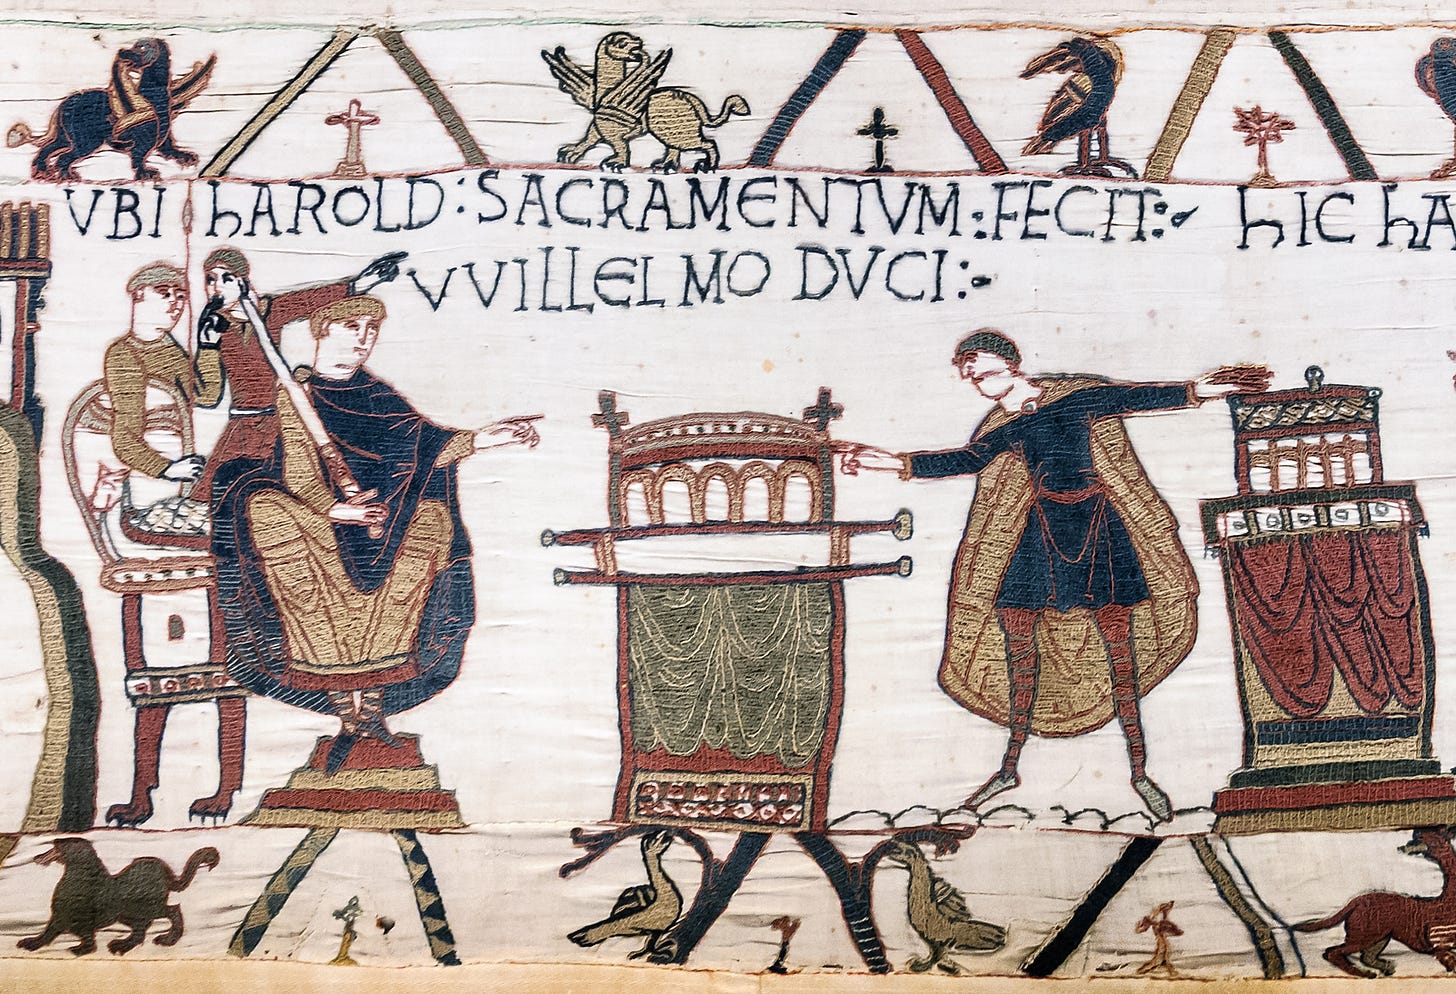 Scene from the Bayeux Tapestry of two men pointing at each other with onlookers in the background; there's Latin text embriodered above them describing Harold's oath.